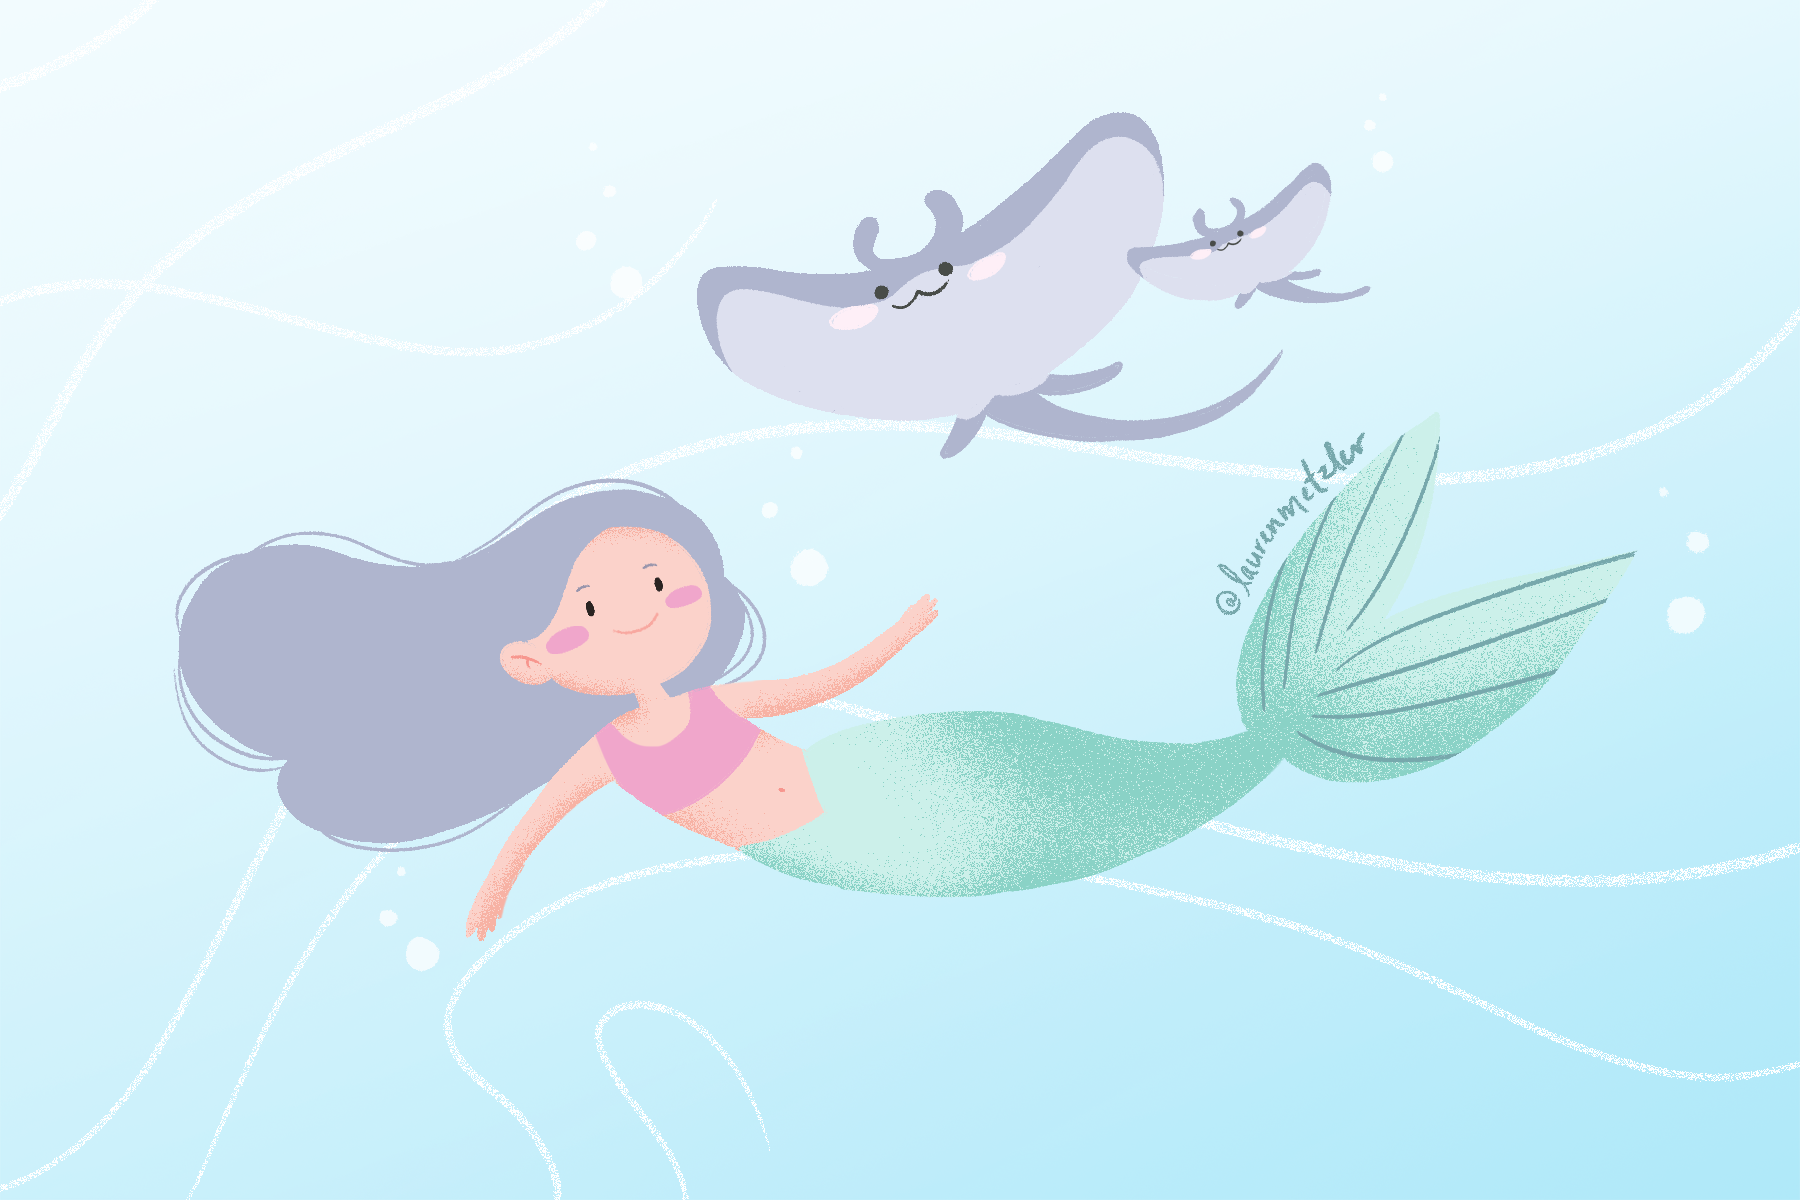 Why I want to be a Children's Book Illustrator